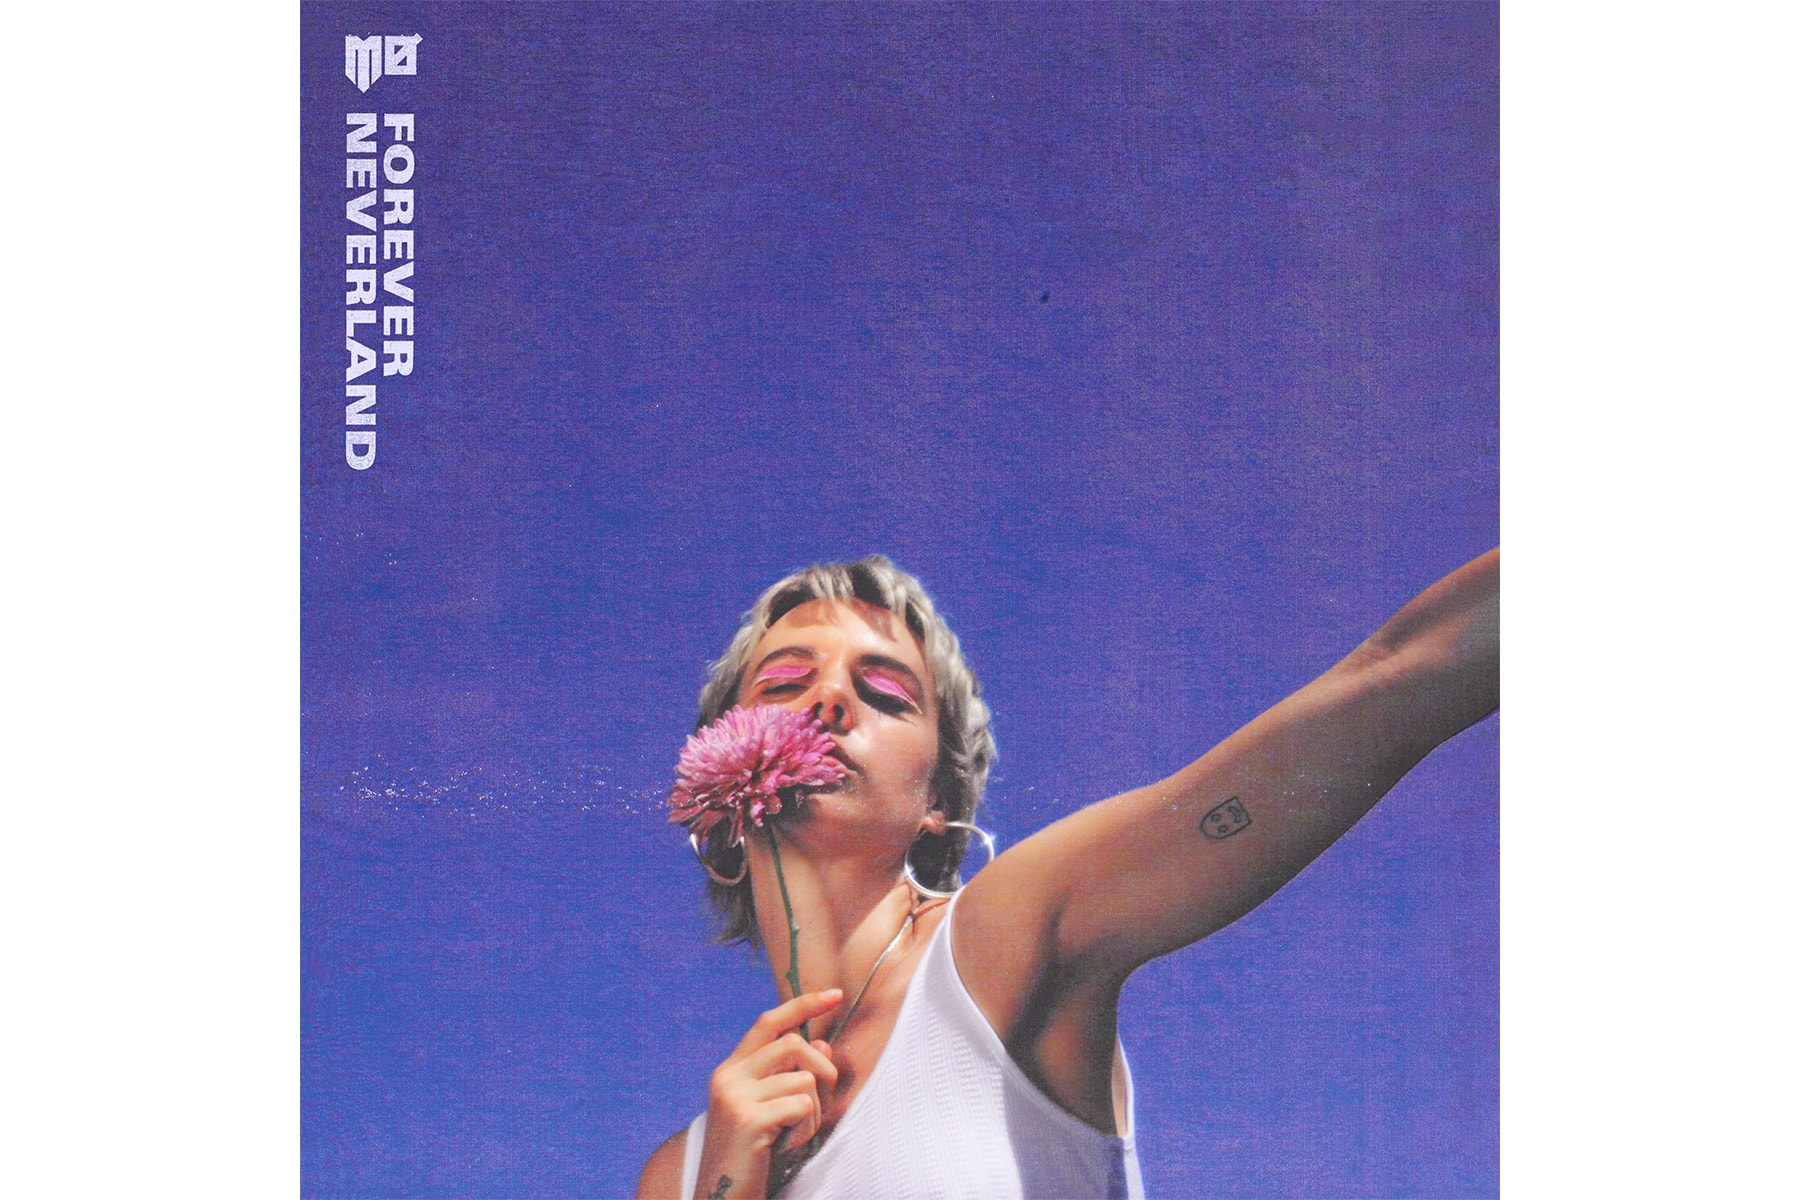 MØ 'Forever Neverland' New Album Stream download diplo charli xcx empress of spotify apple music